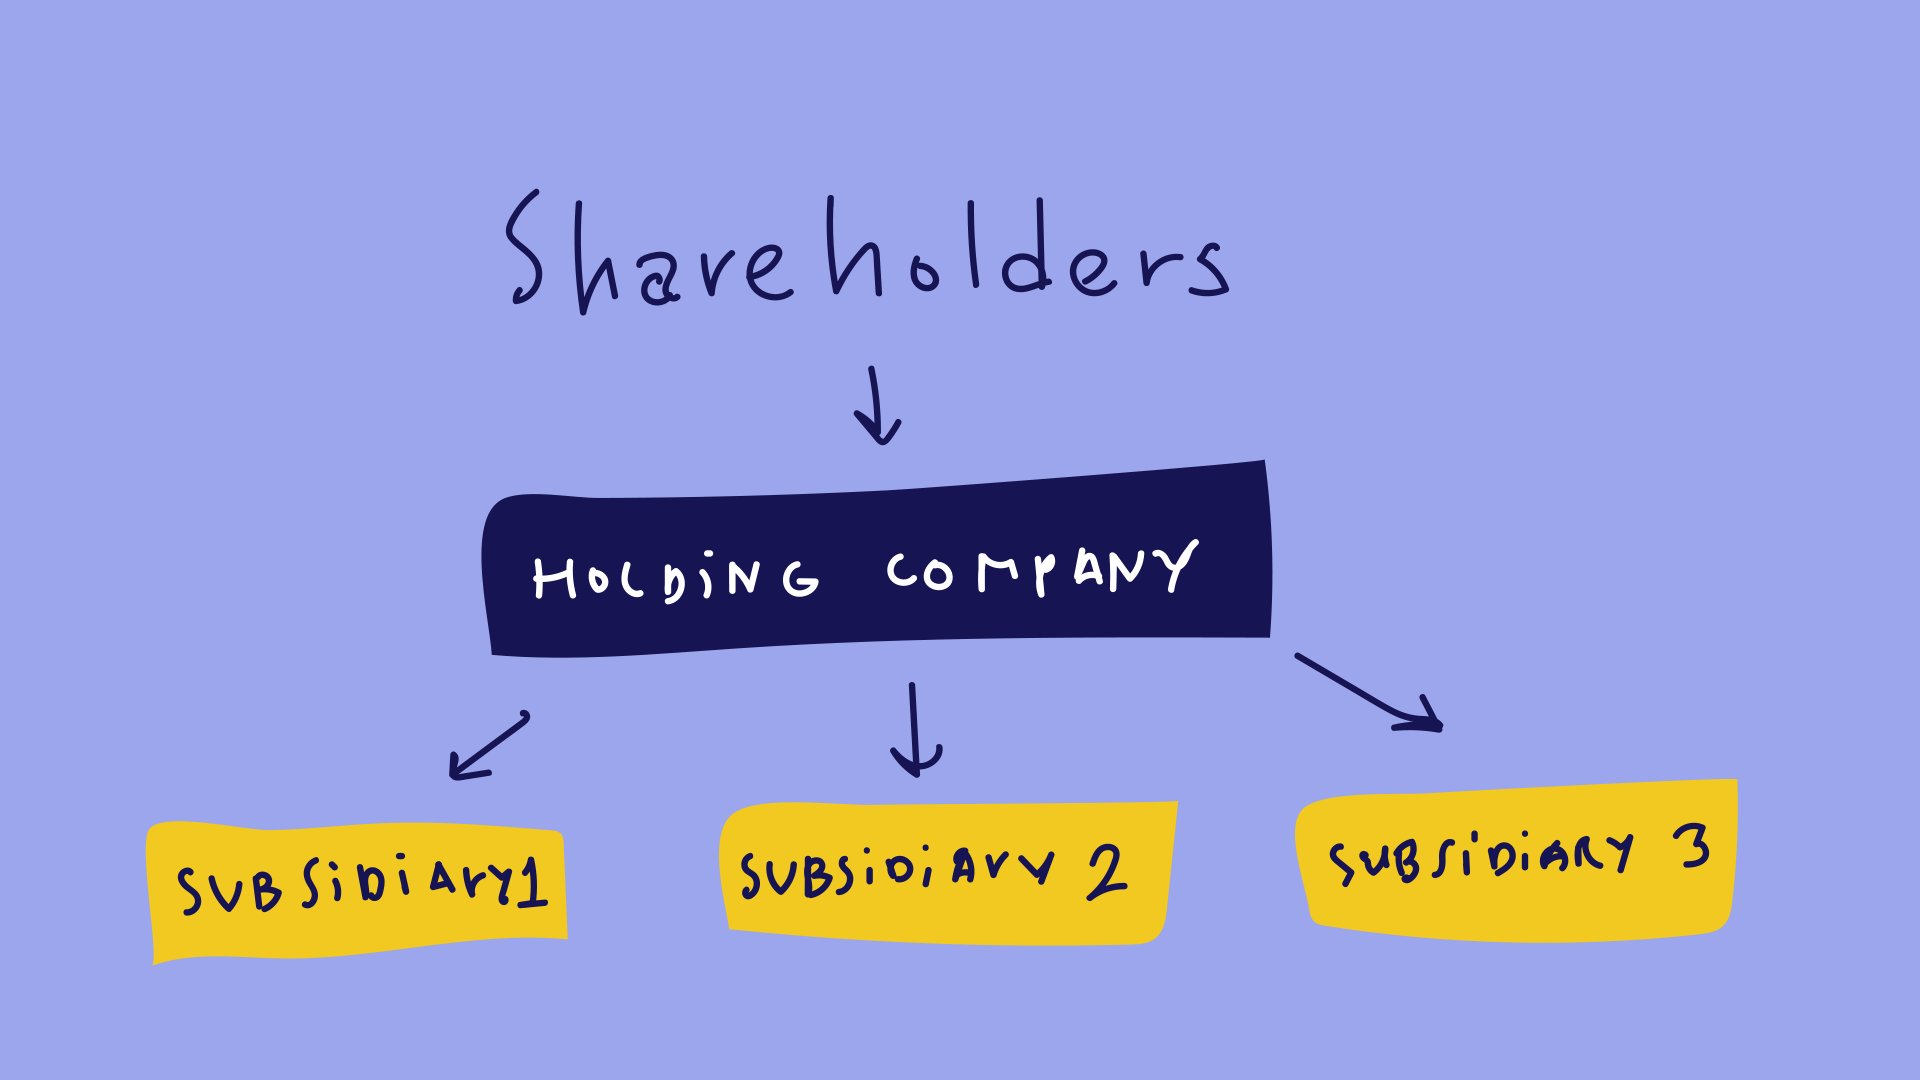 Holding company structure